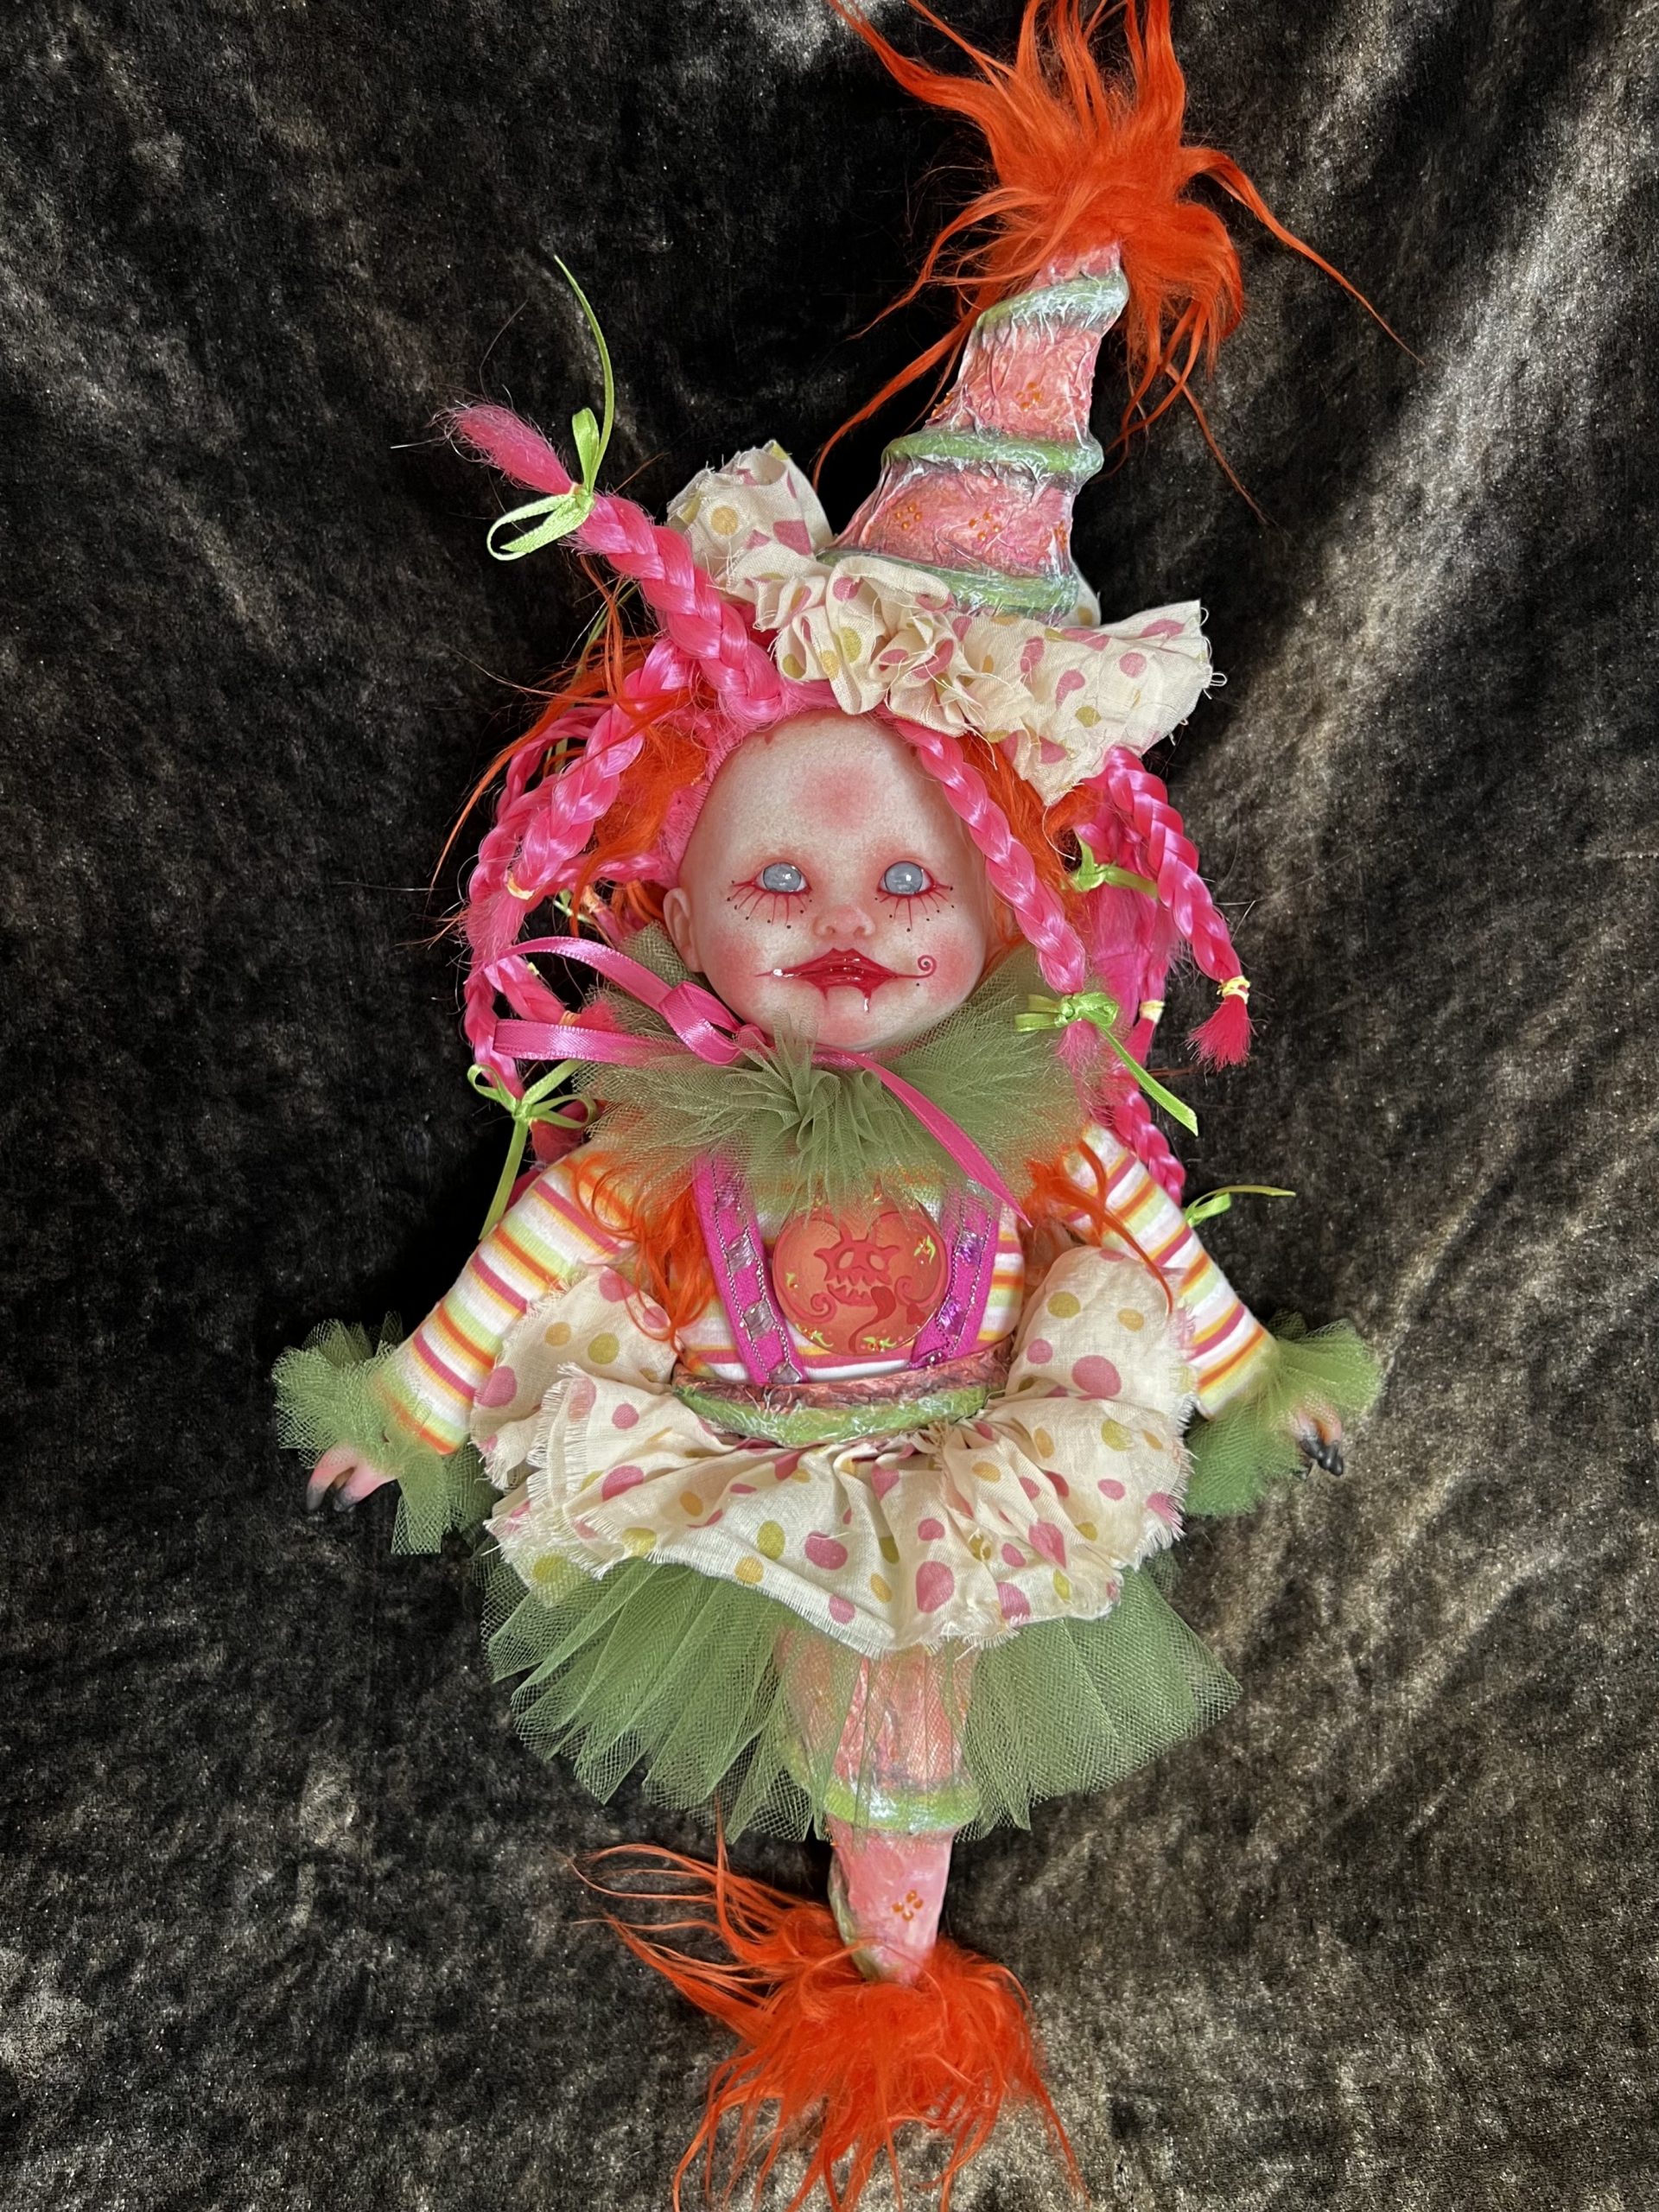 one of a kind pink and green artdoll inspired by paintings of Michael Hussar gothic creepy clown ornament